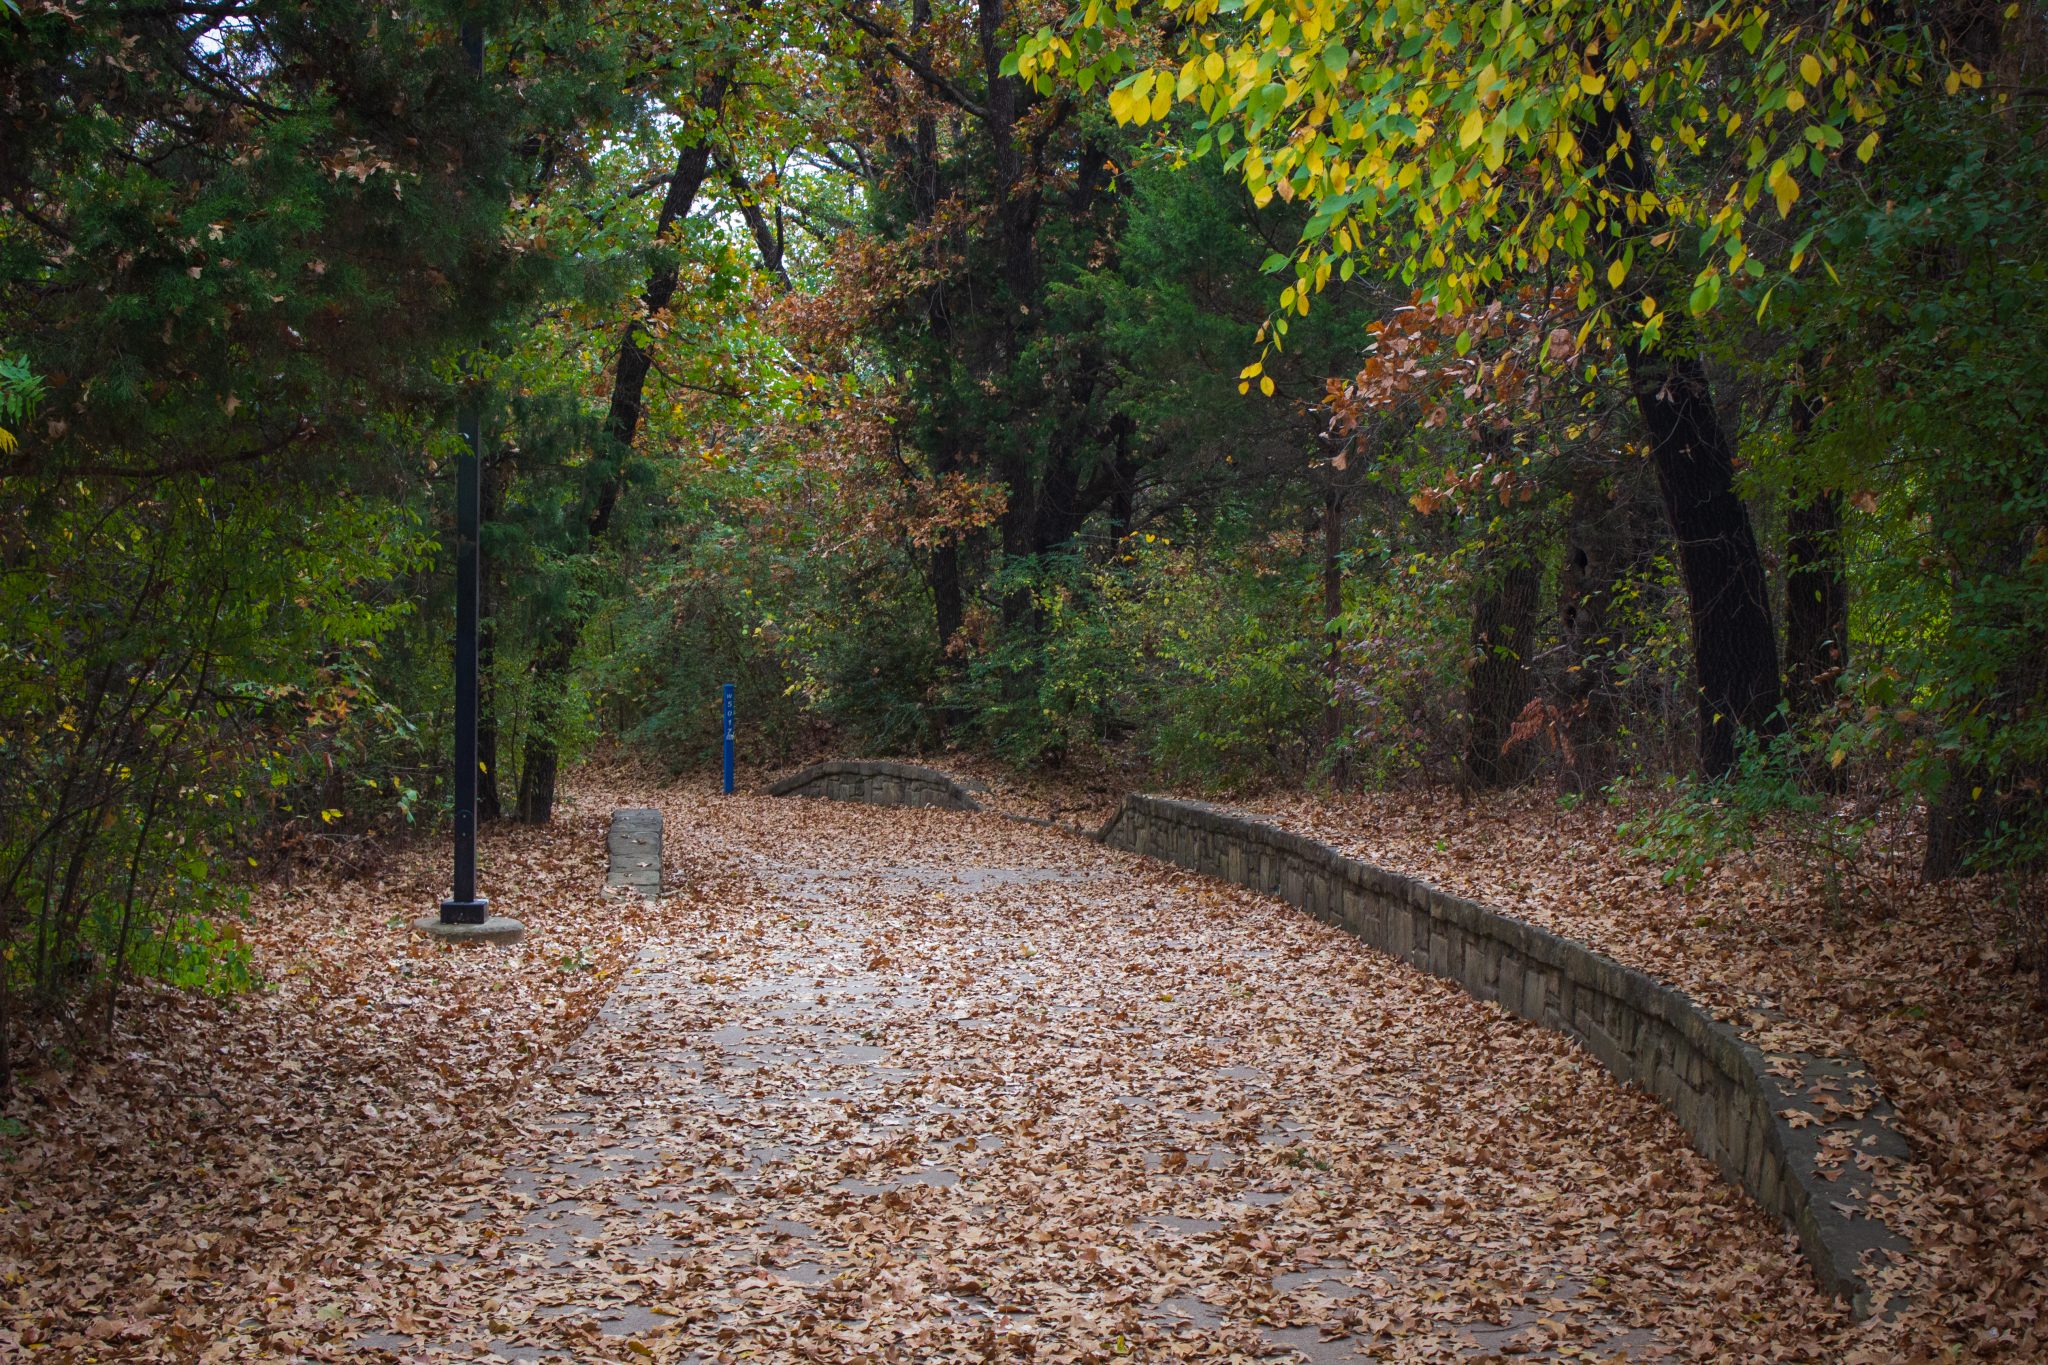 A park trail completely covered in leaves